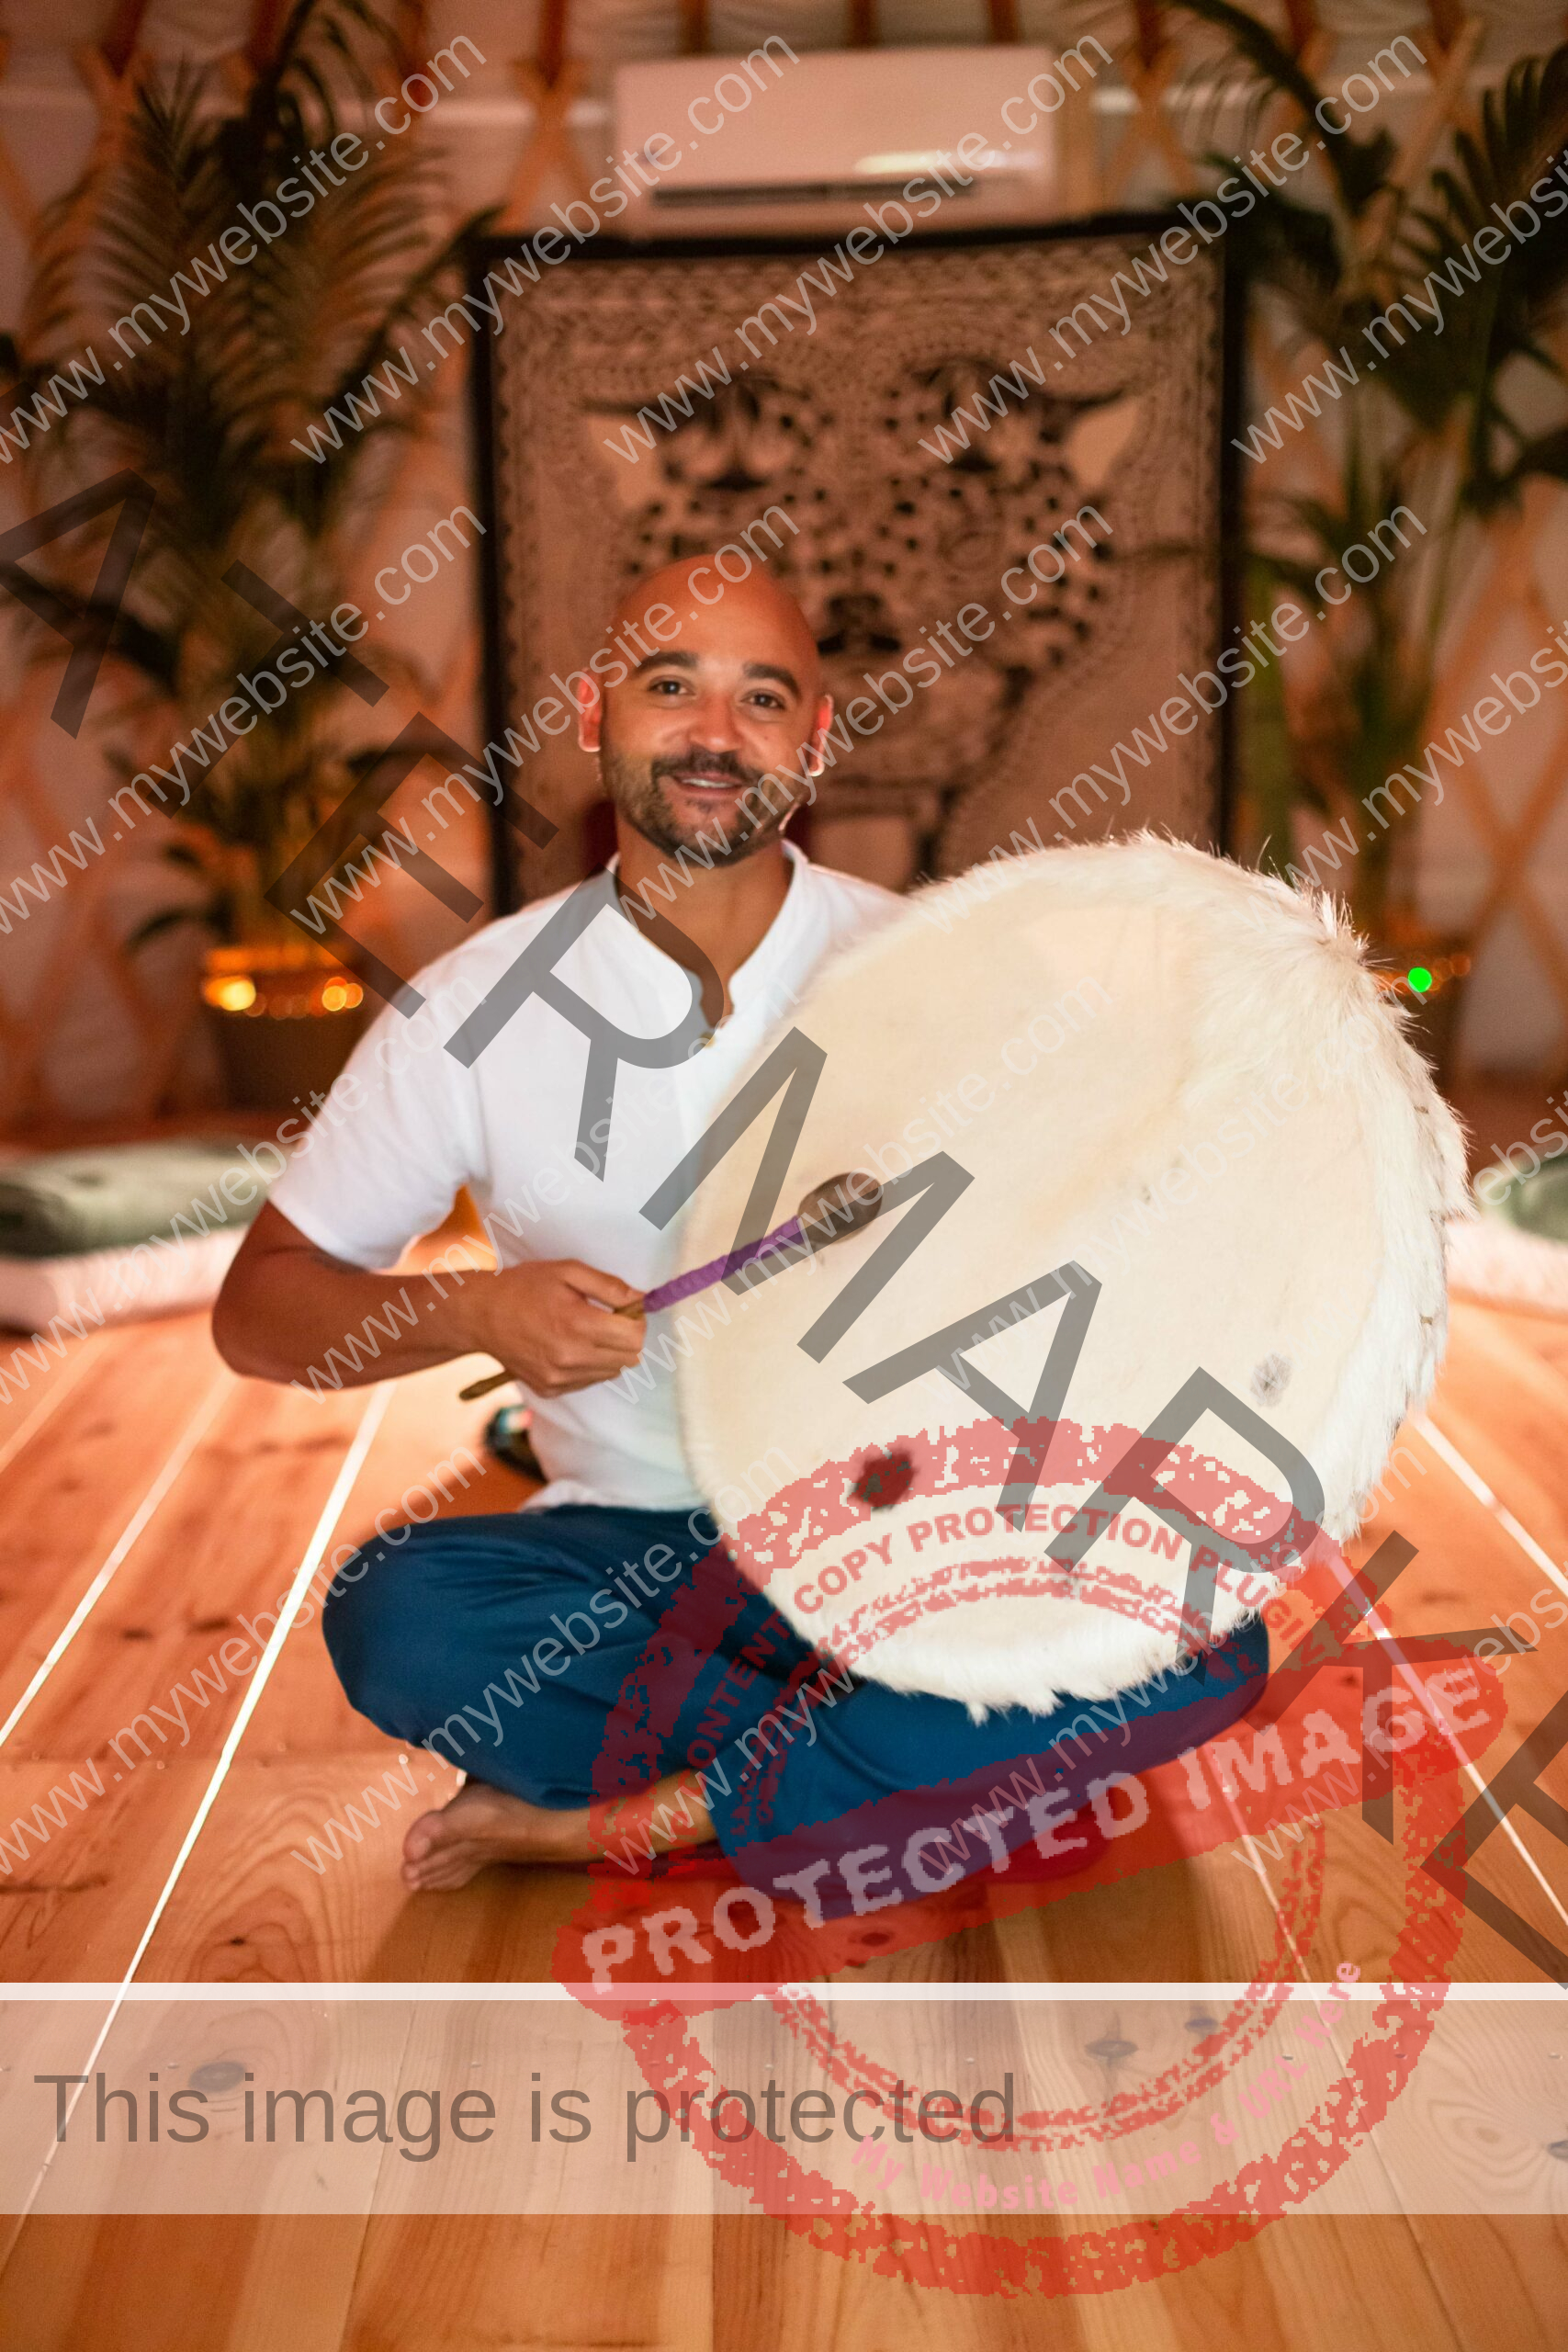 ceremony leader playing a shamanic drum inside a warm lighted ceremony room